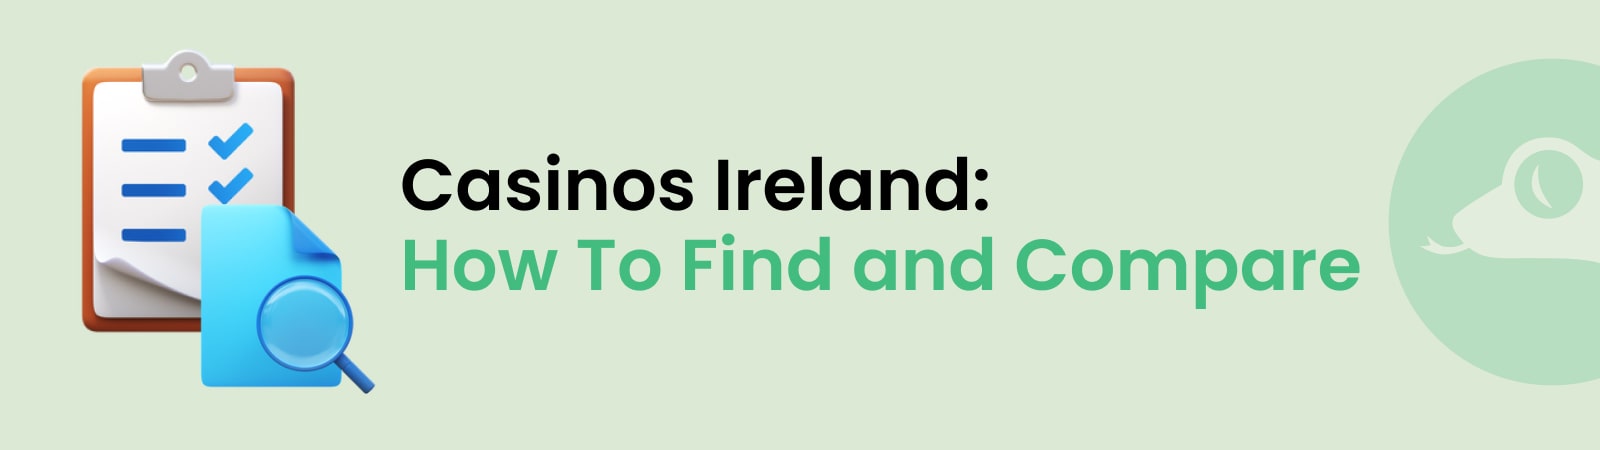 casinos ireland how to find and compare